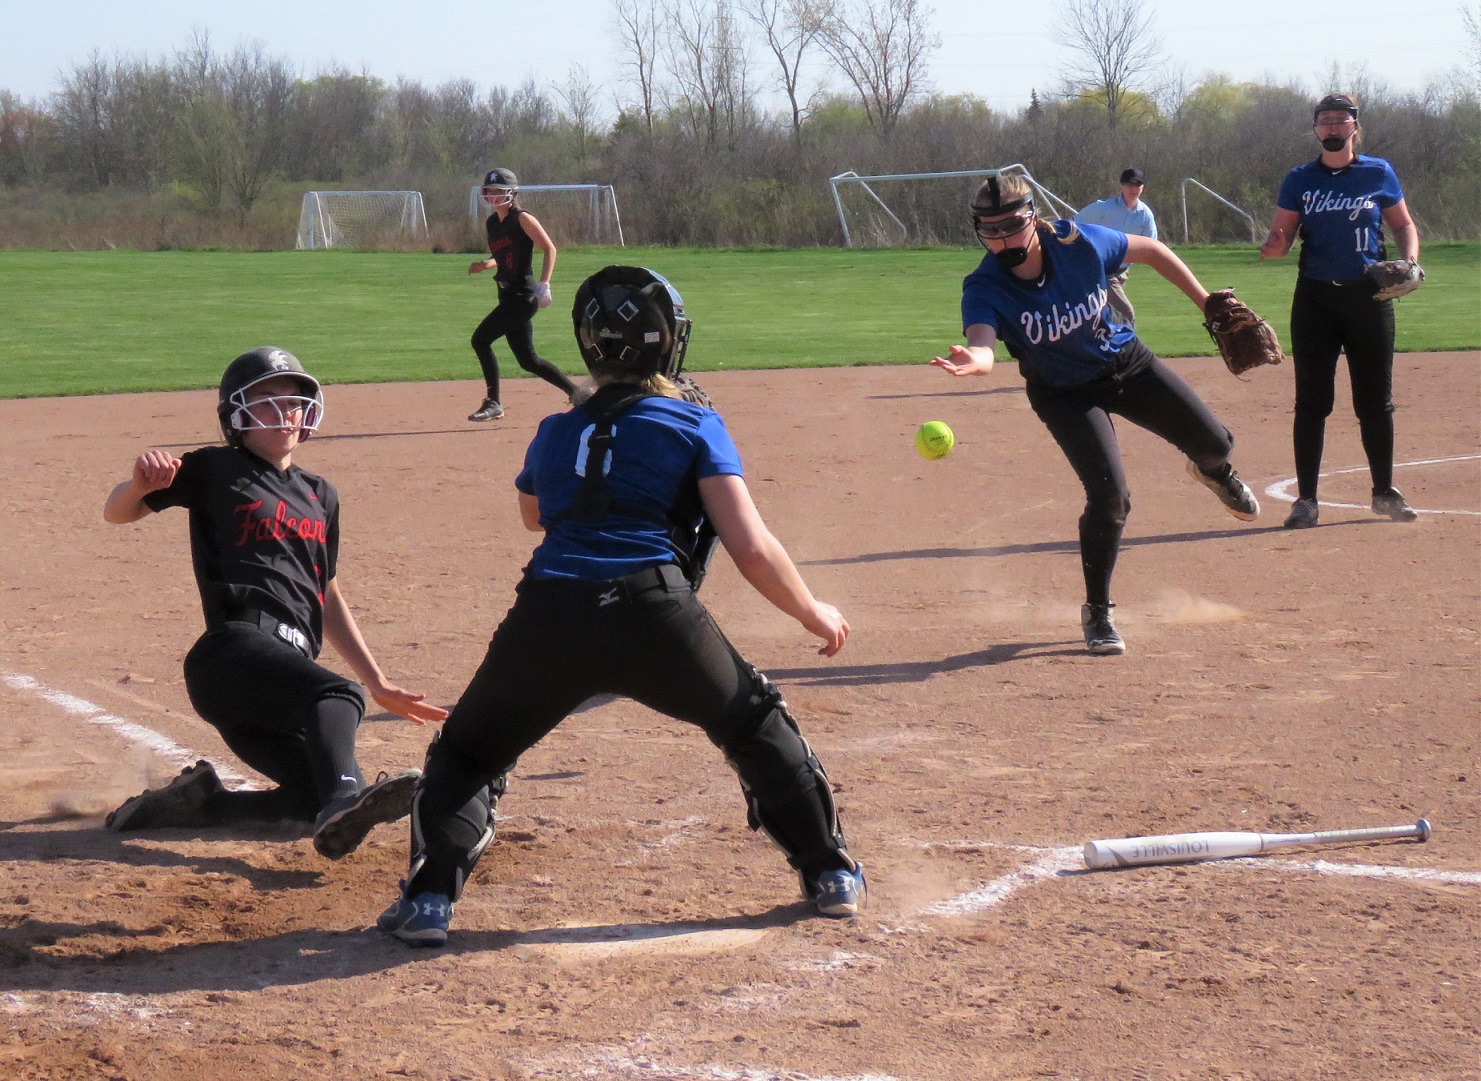 Carly Milleville slides into home plate safely after a squeeze bunt by Sydney Crangle, dodging the tag of Grand Island catcher Shay Sommer. (Photo by David Yarger)